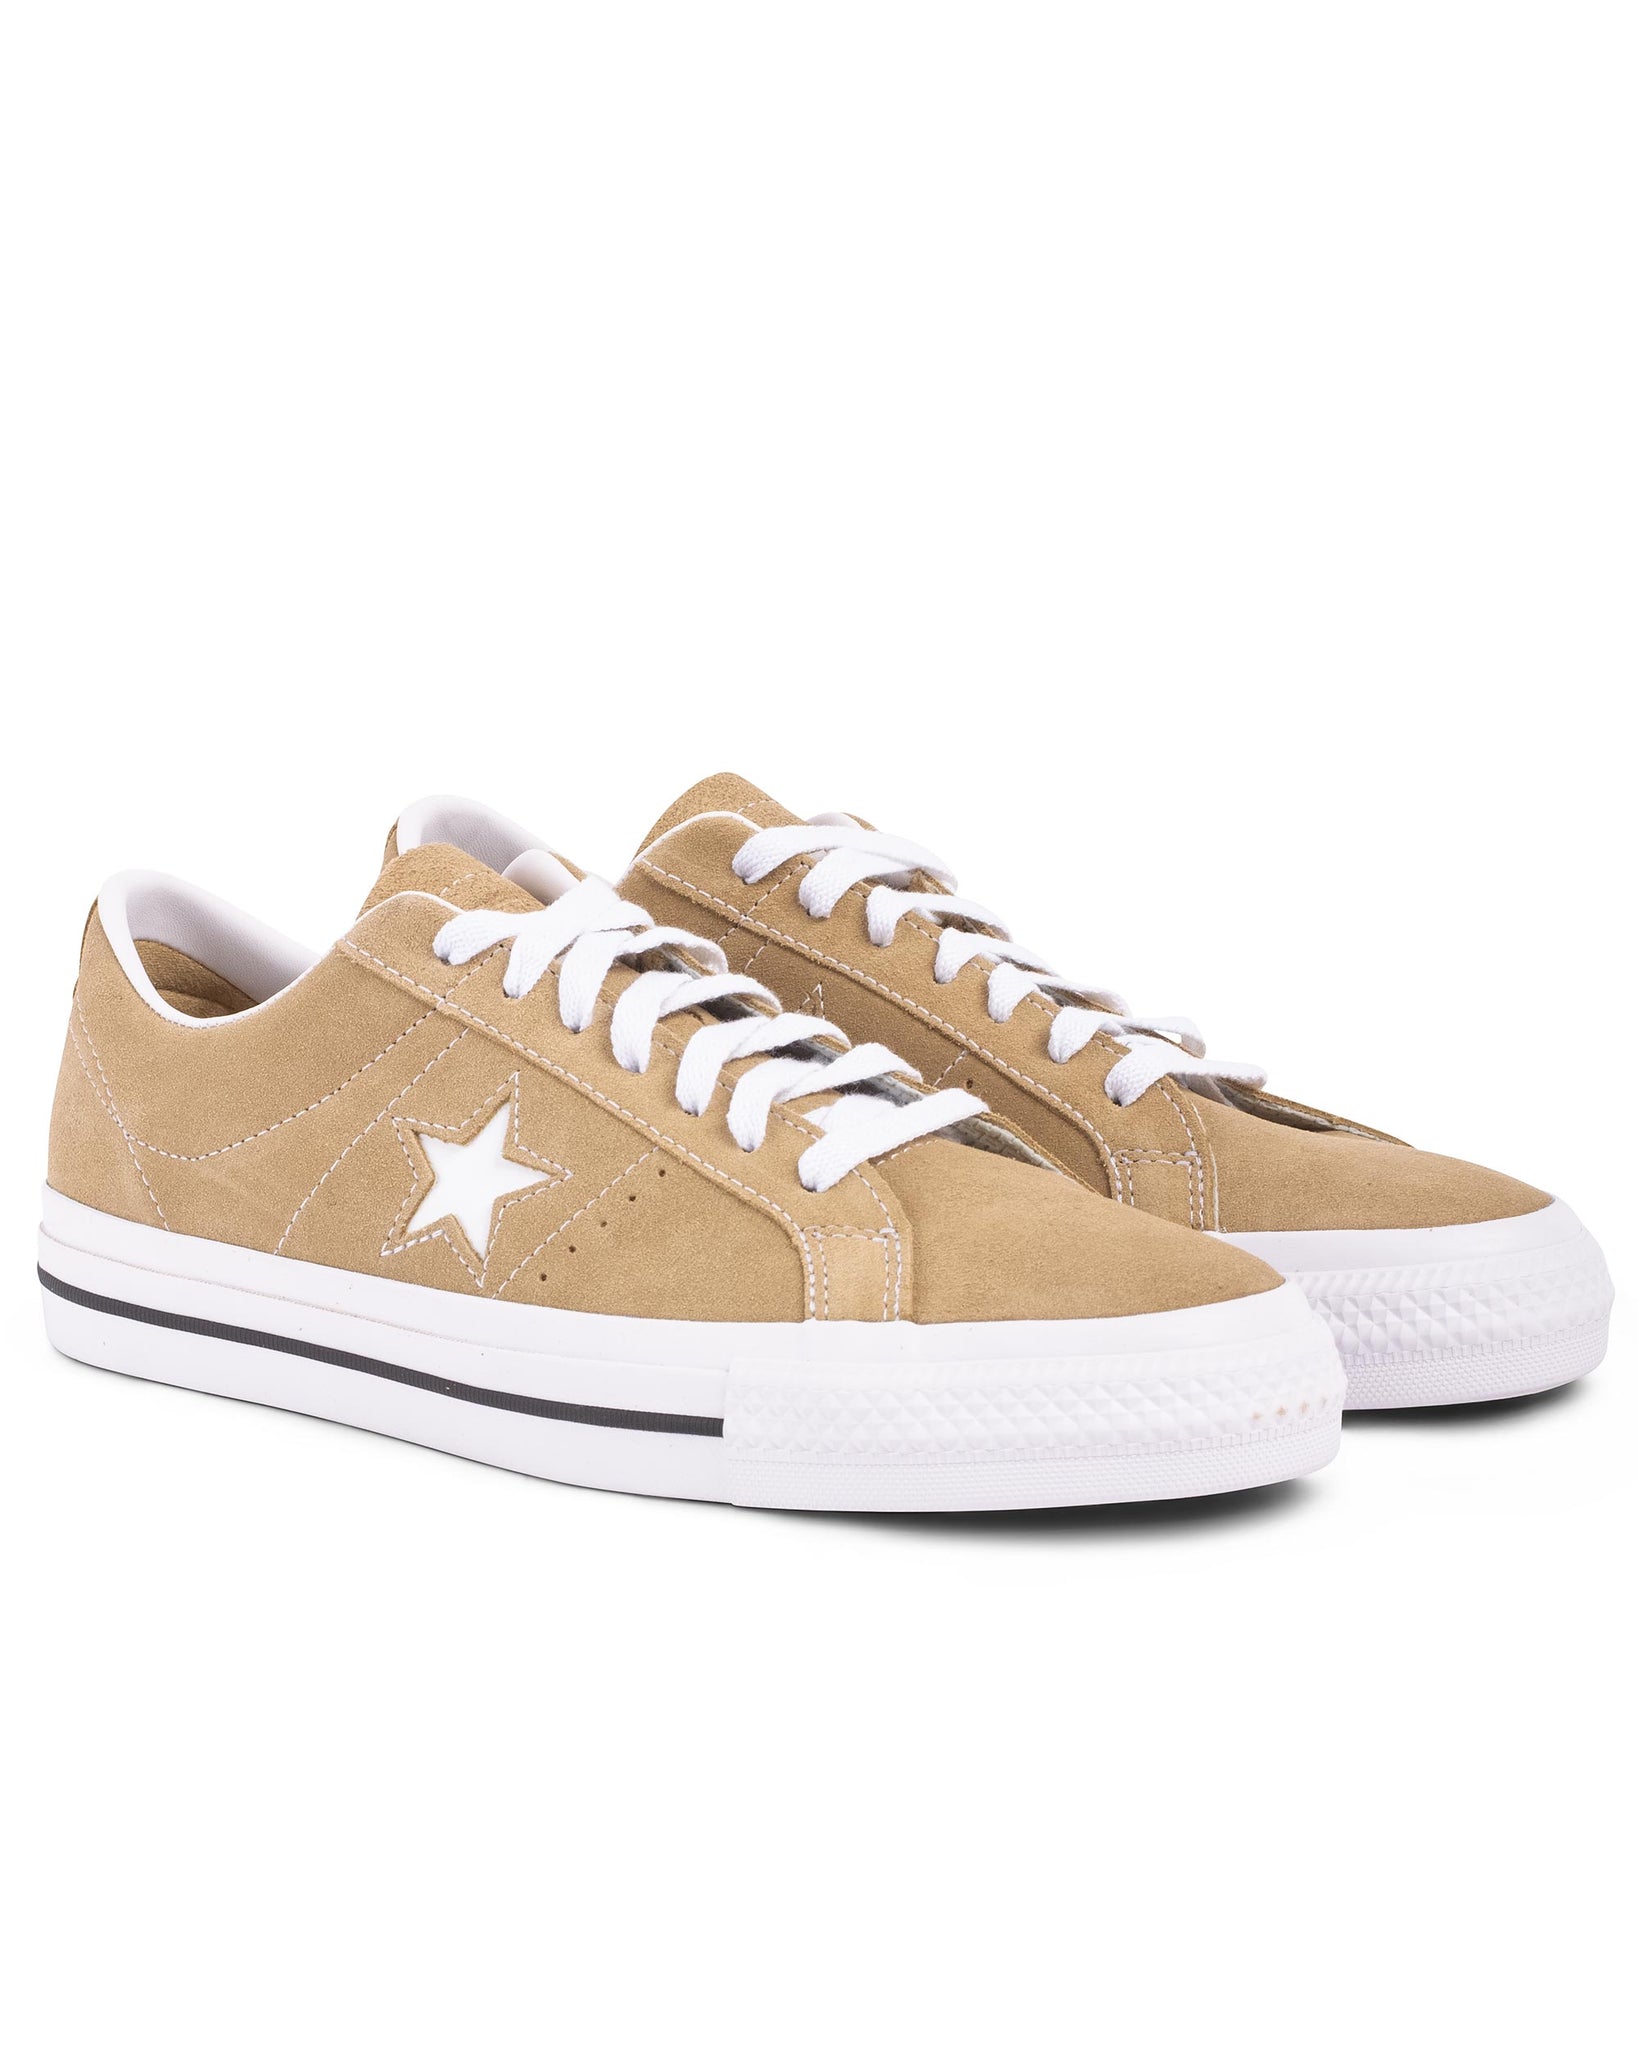 Converse One Star Pro Ox Nomad Khaki A00941C Side